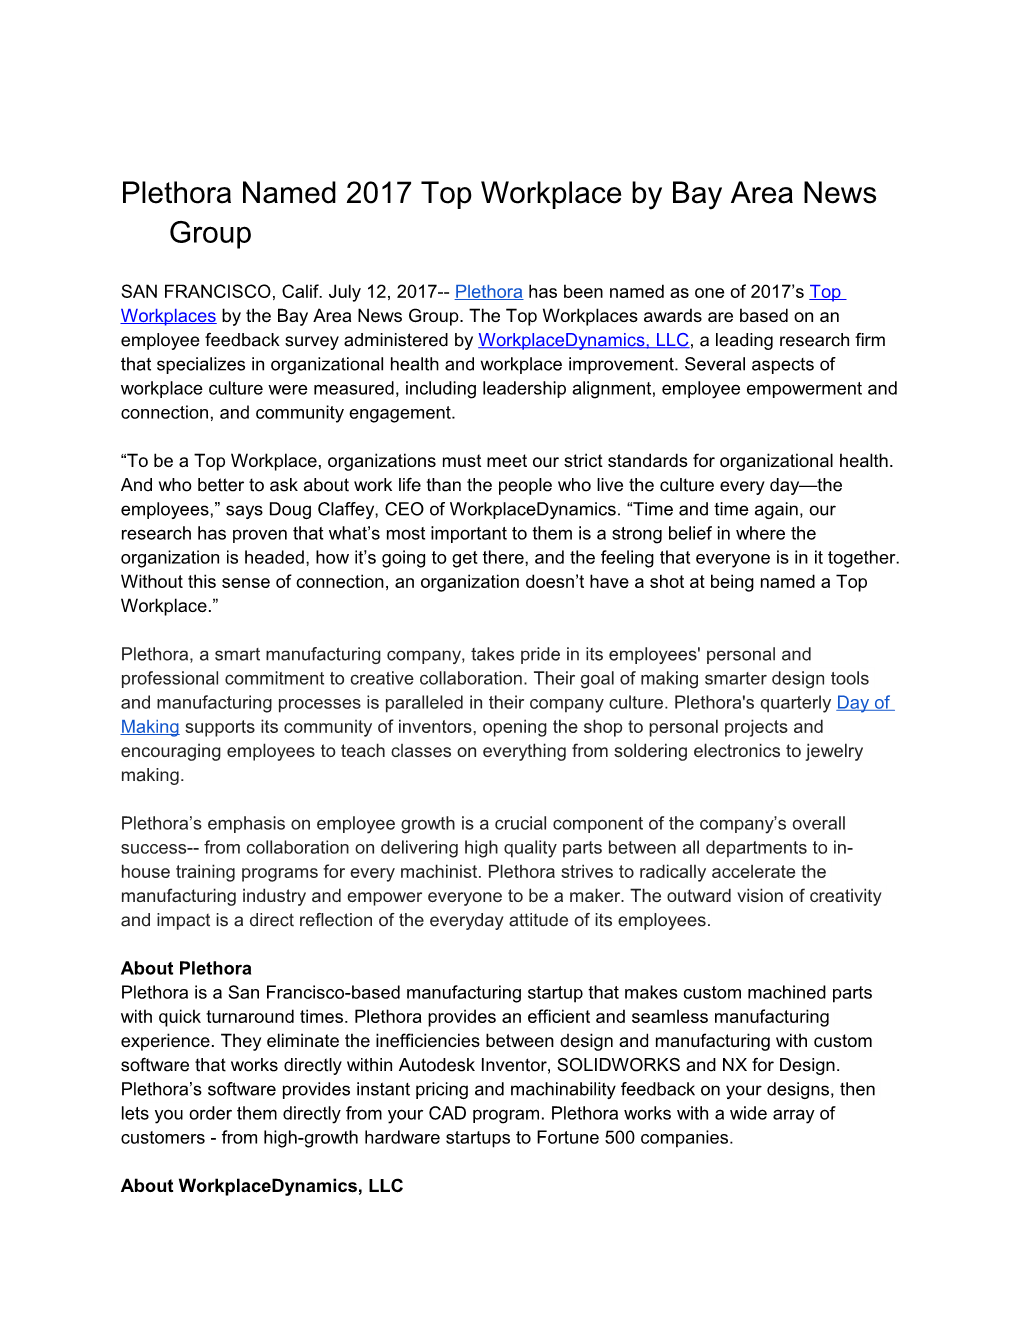 Plethora Named 2017 Top Workplace by Bay Area News Group